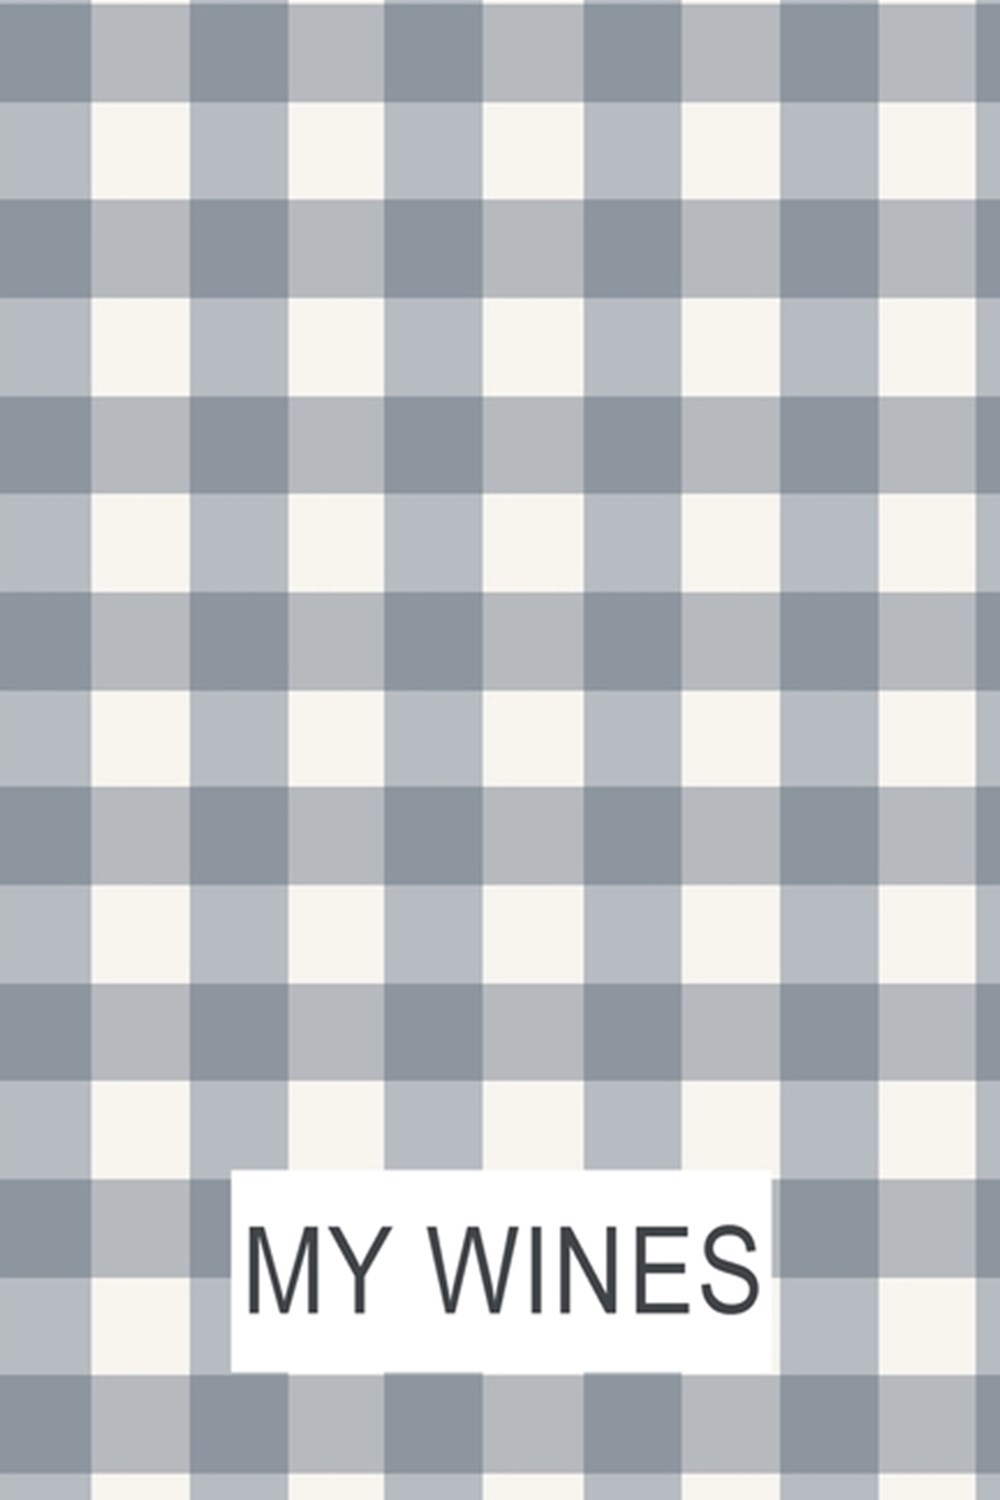 My Wines Blank Wine Score Cards for Wine Connoisseurs, Wine Lovers and Wine Tasting or Degustation E